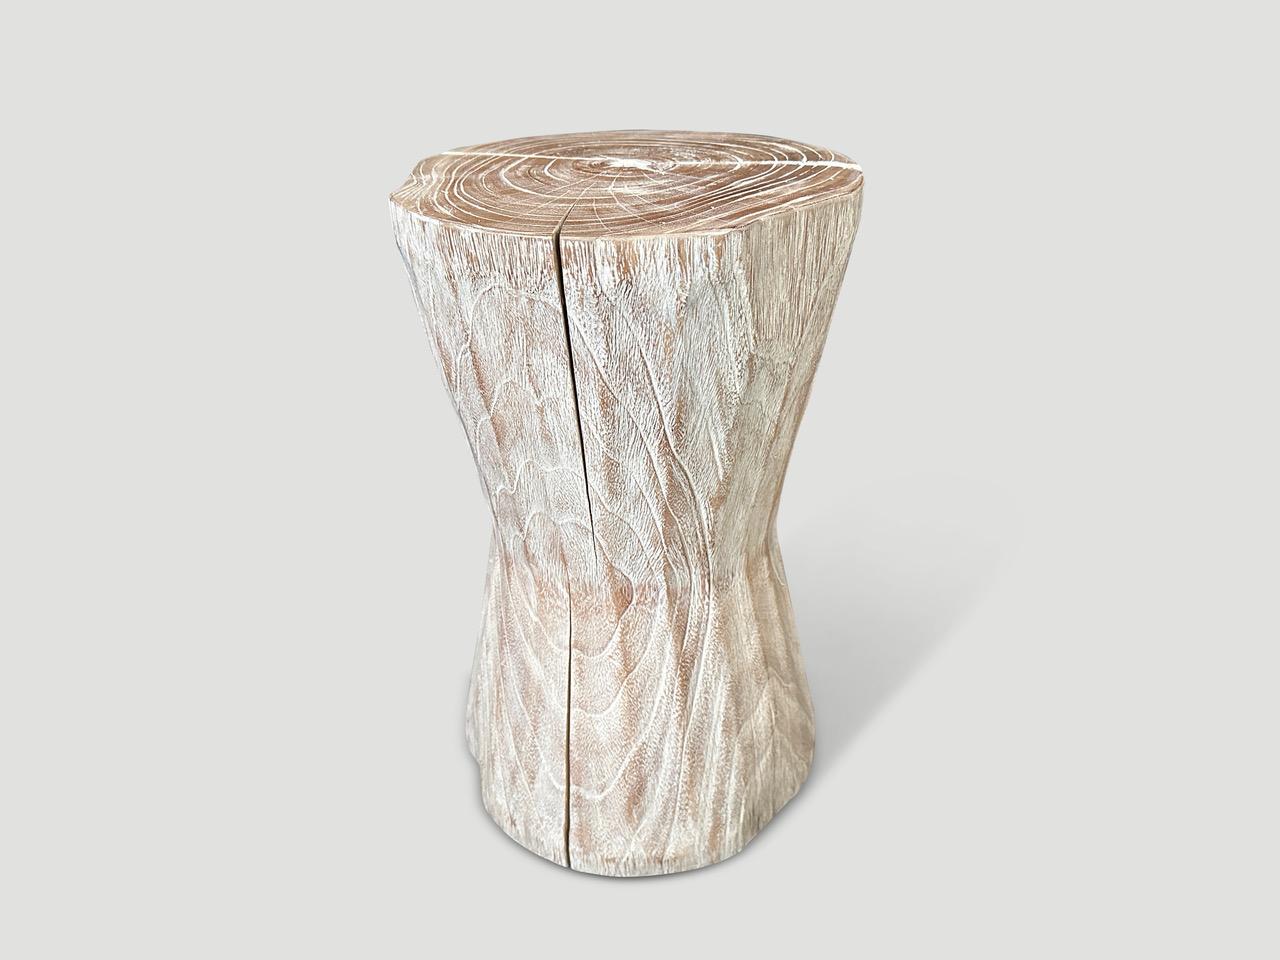 Andrianna Shamaris Bevelled Teak Wood Side Table or Stool In Excellent Condition For Sale In New York, NY